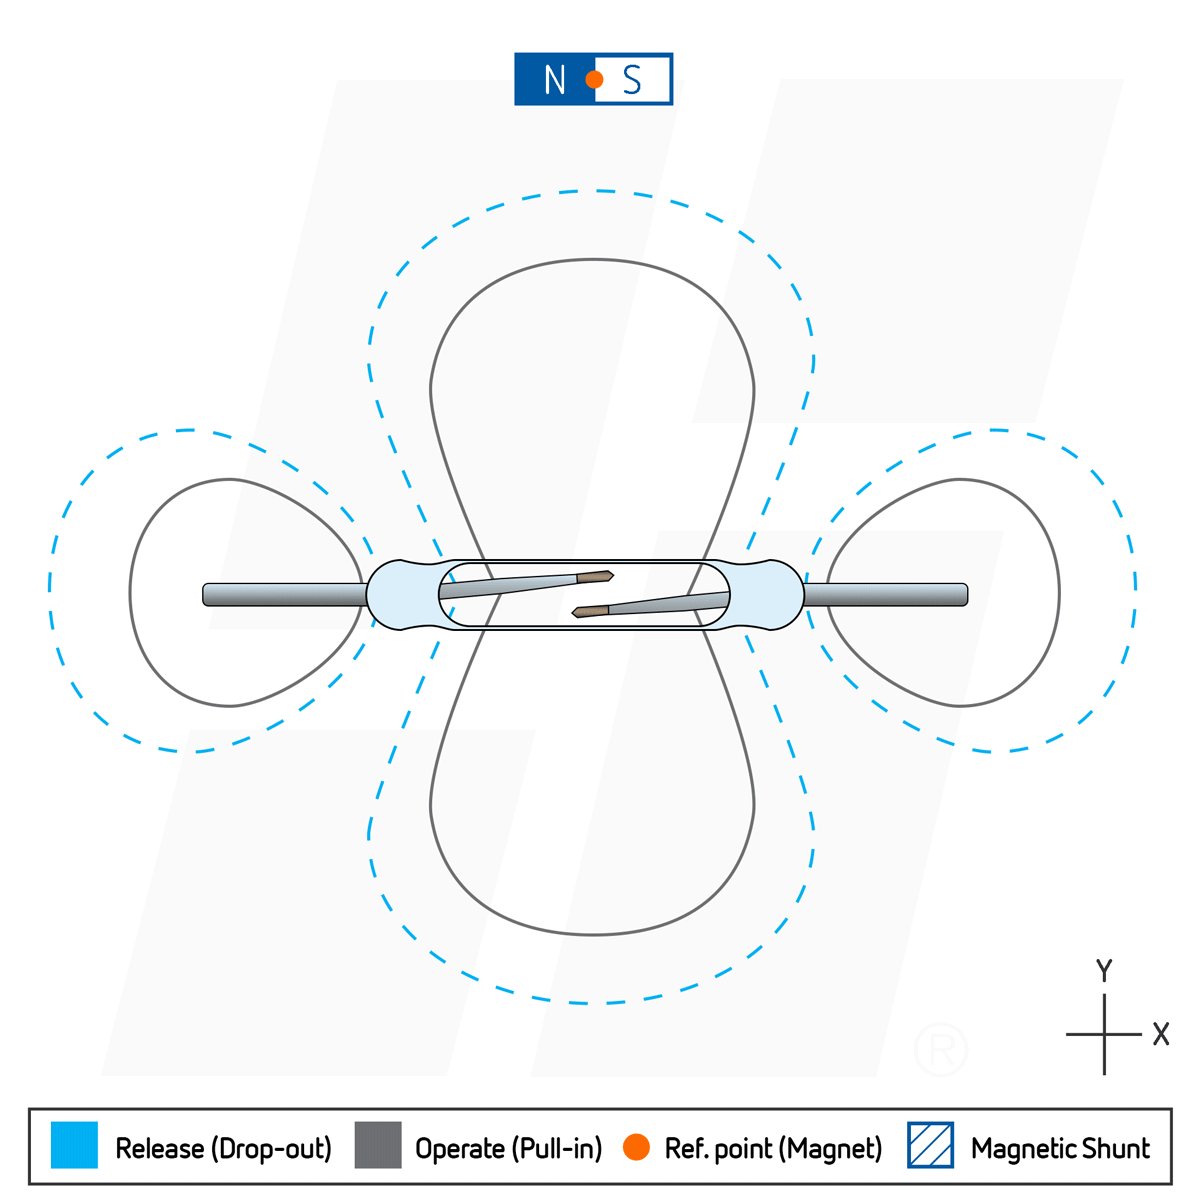 How a reed switch works with a permanent magnet positioned parallel to the switch and moving perpendicular over the center of the switch.